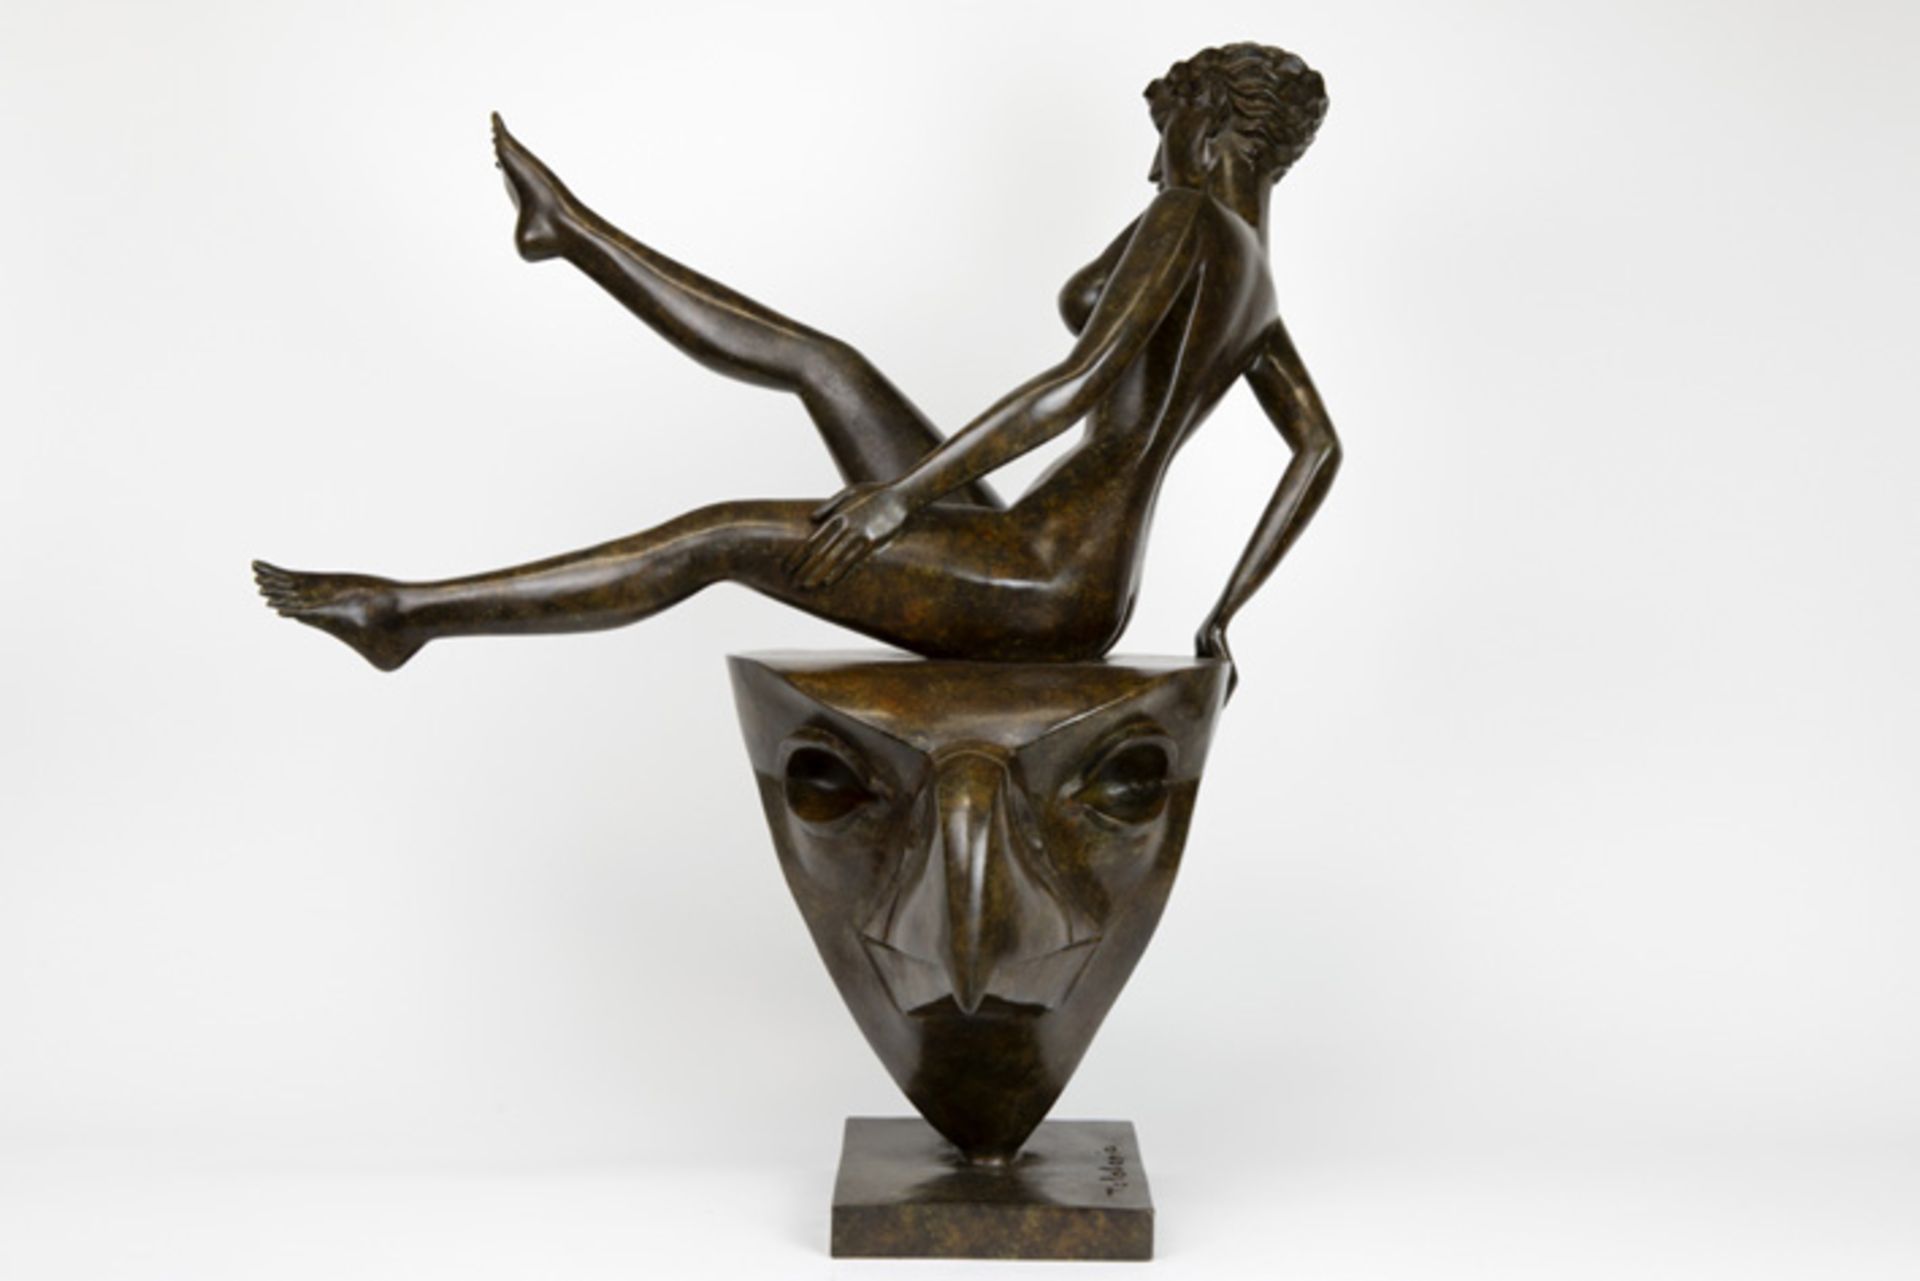 21st Cent. "Lady on the top" sculpture in bronze - signed Igor Tcholaria and with foundry mark - Bild 4 aus 5